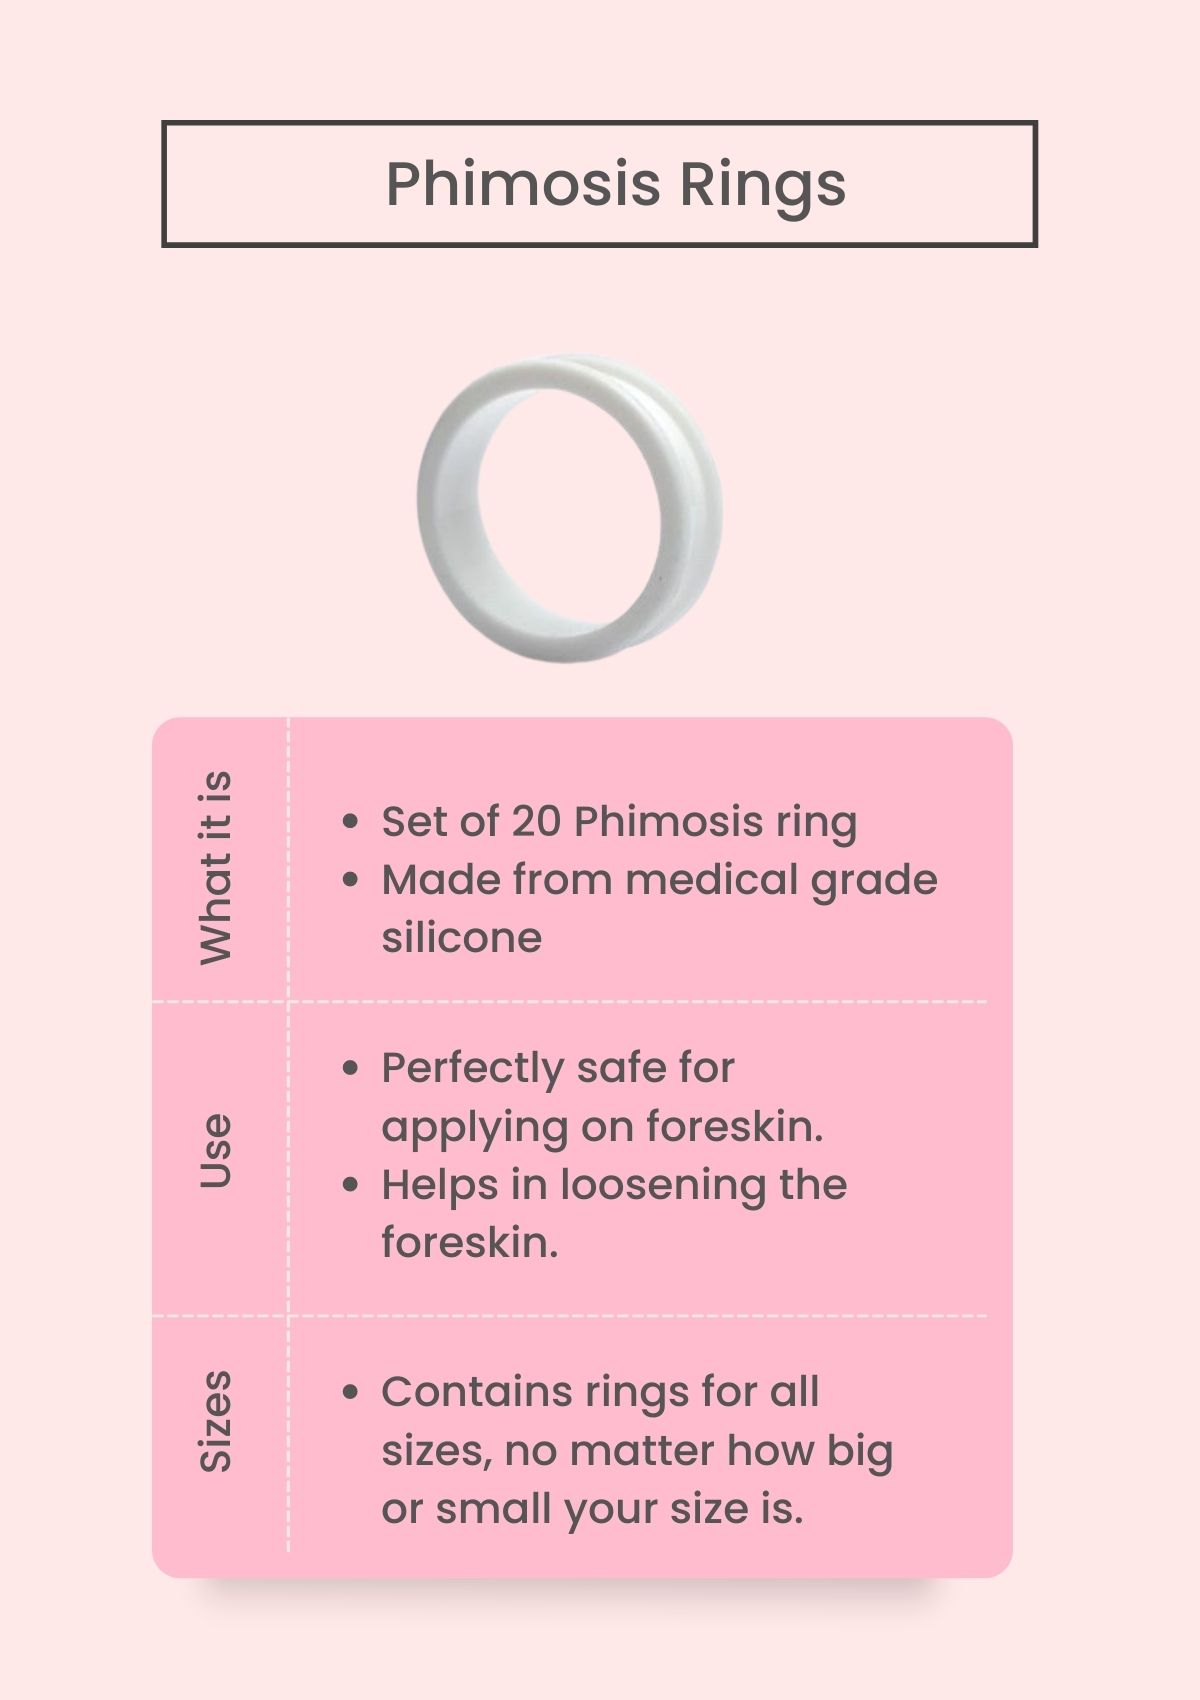 Phimostretch Phimosis Stretcher Rings Kit - Has 20 Rings from 3mm